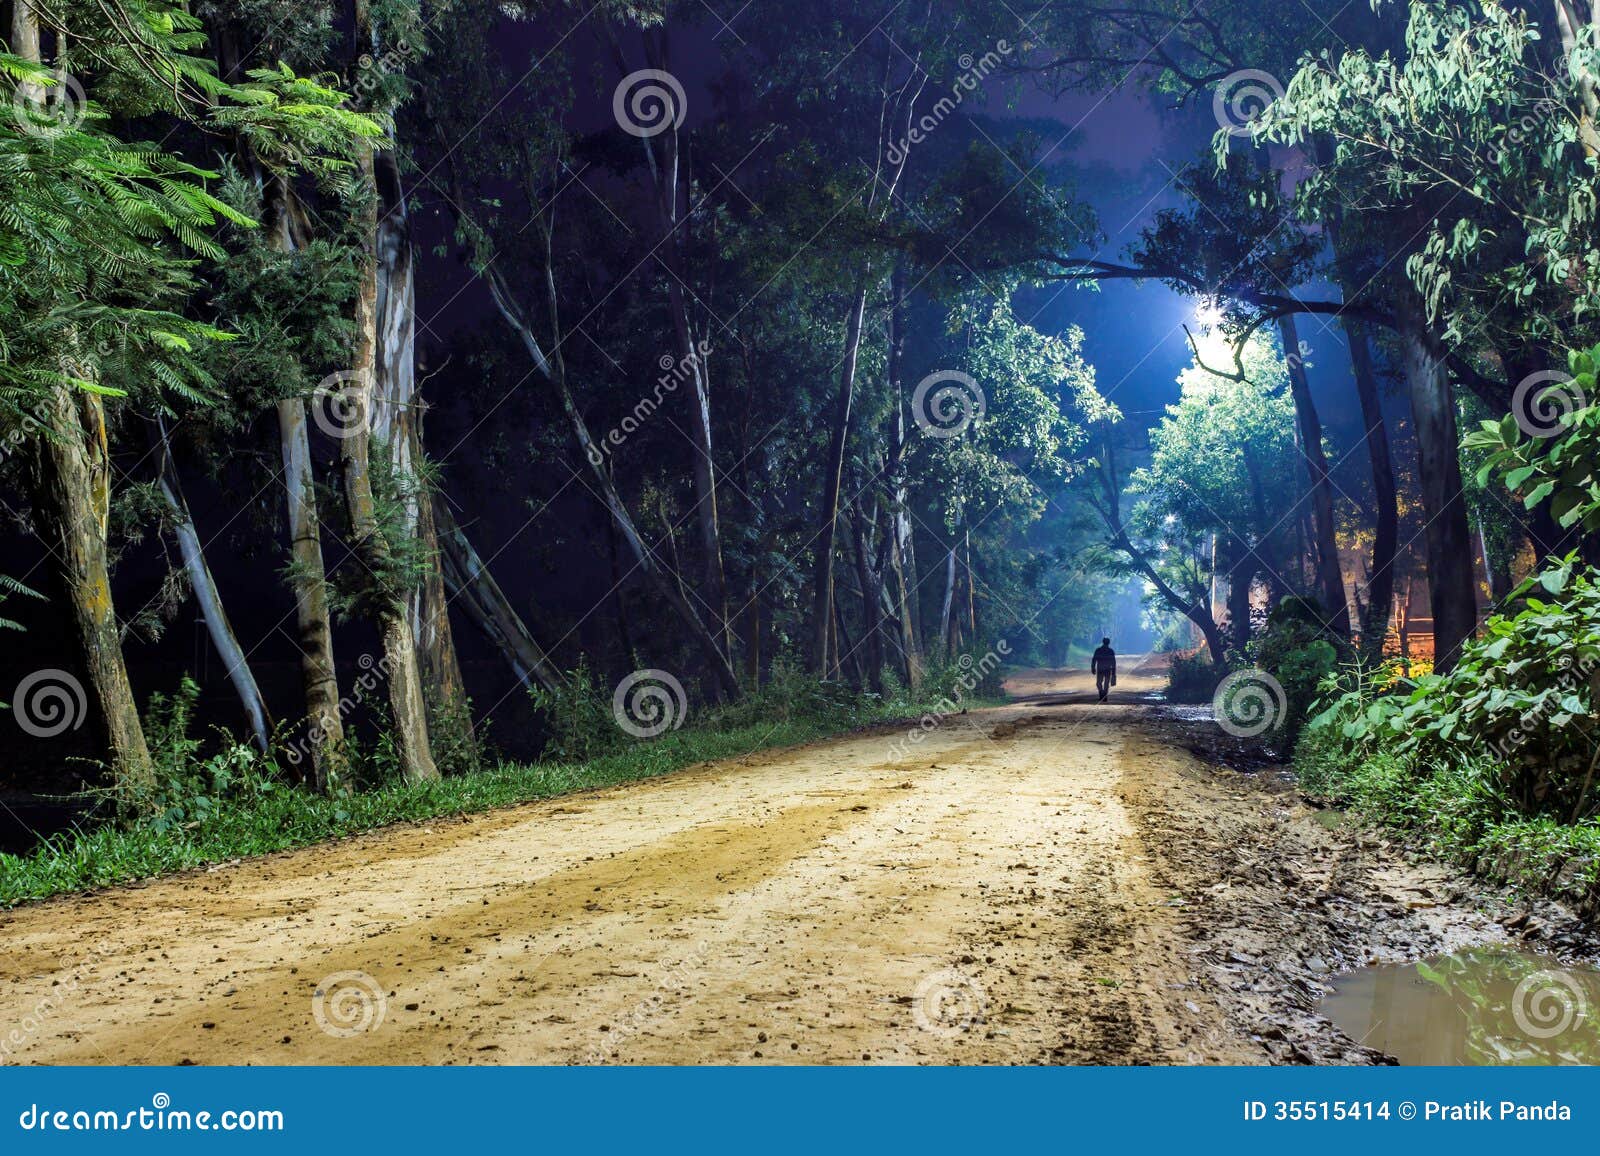 lonely man on forest road, night landscape